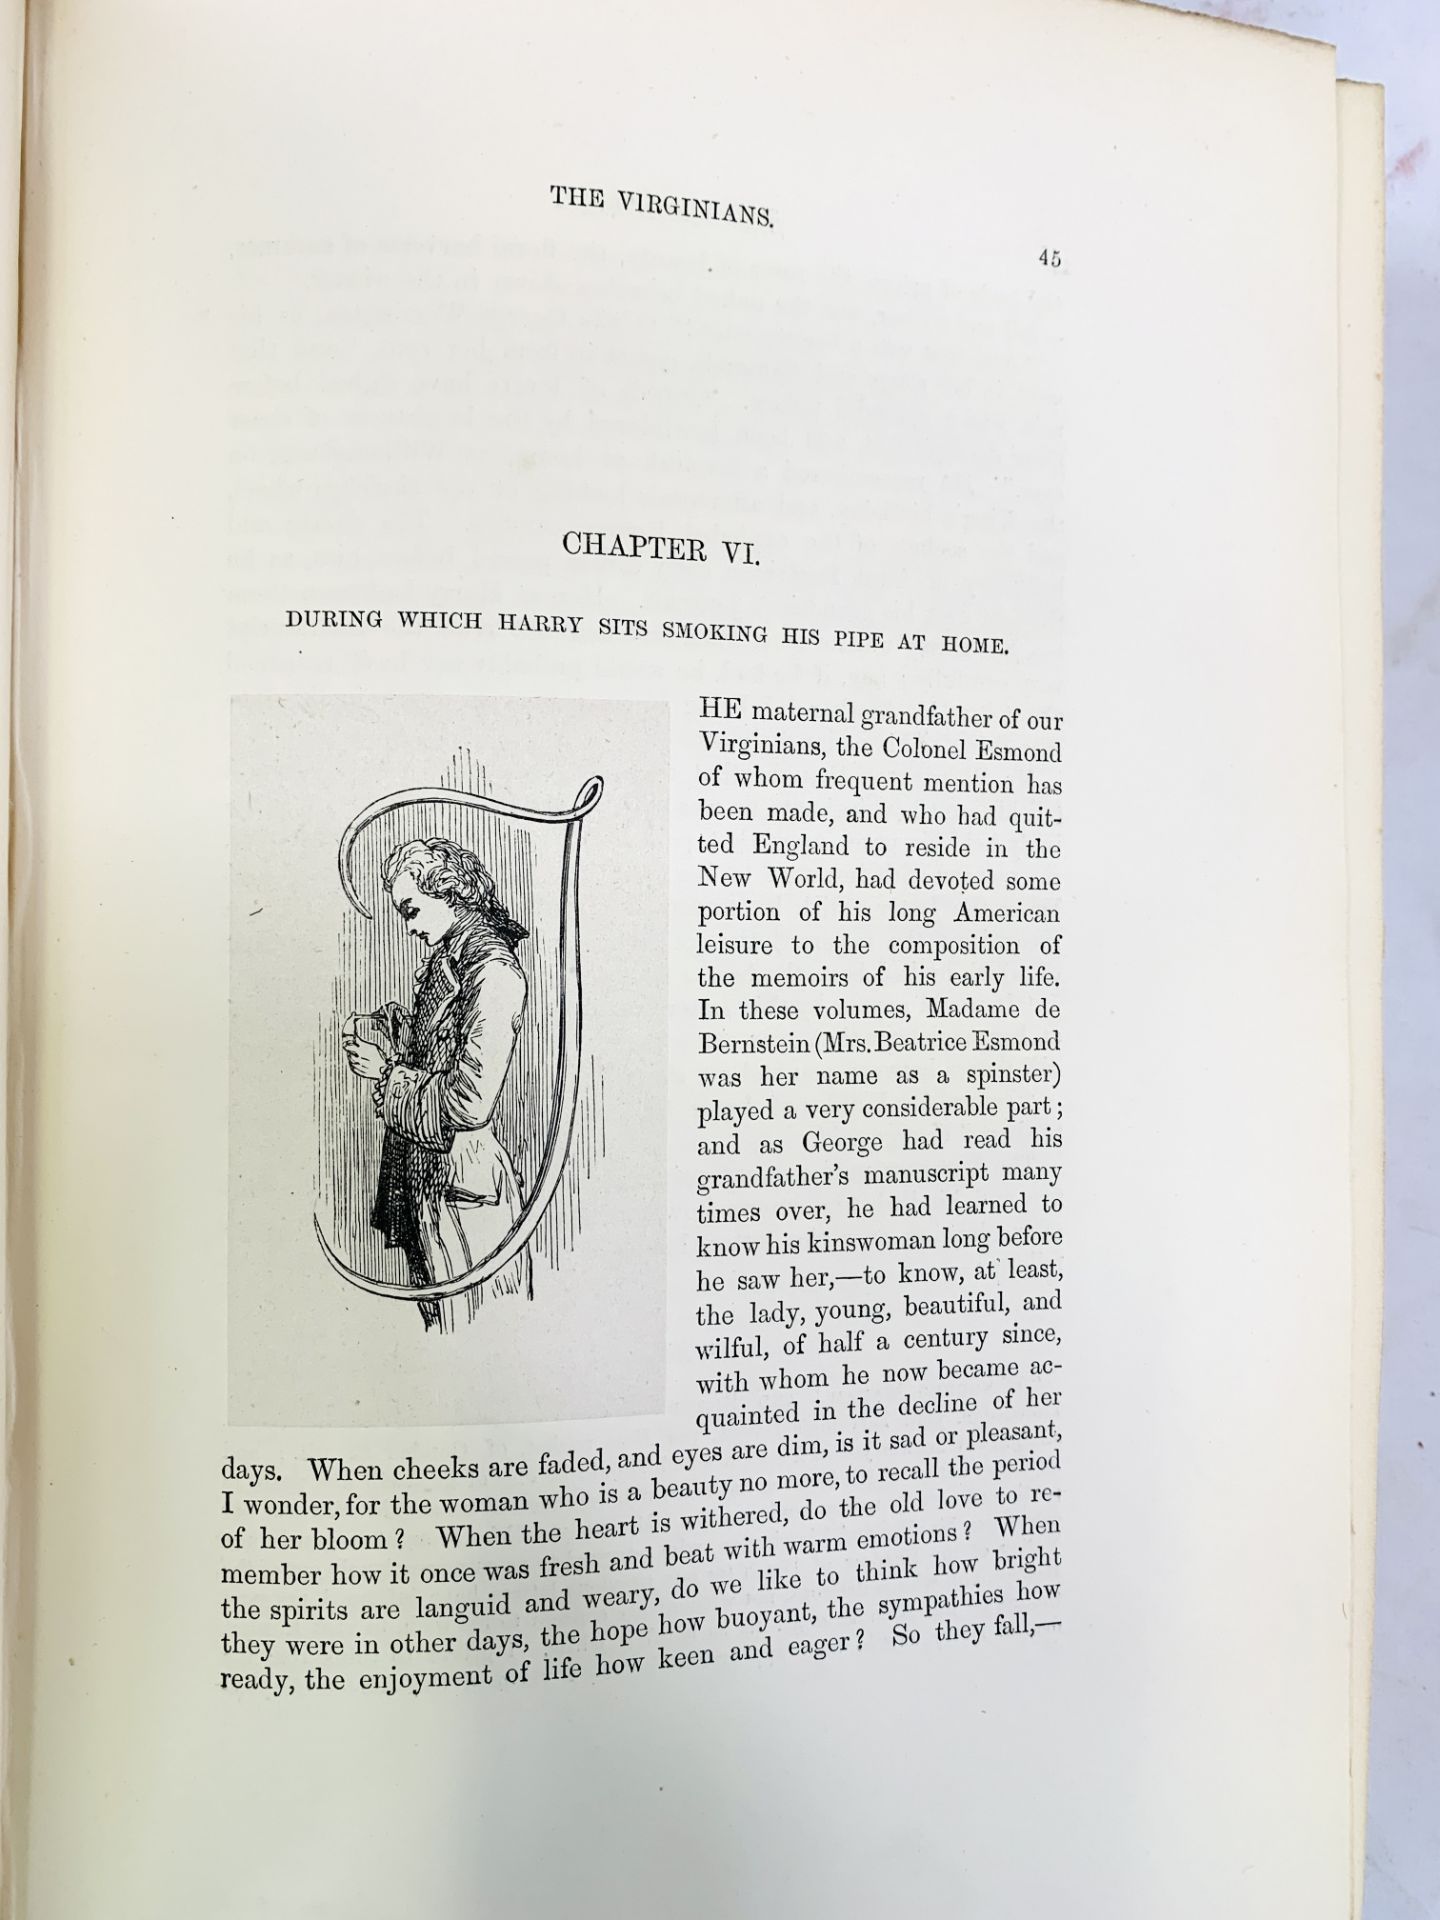 The Works of W. M. Thackeray: 'The Virginians', volumes 1 and 2, limited edition, published 1879 - Image 4 of 4